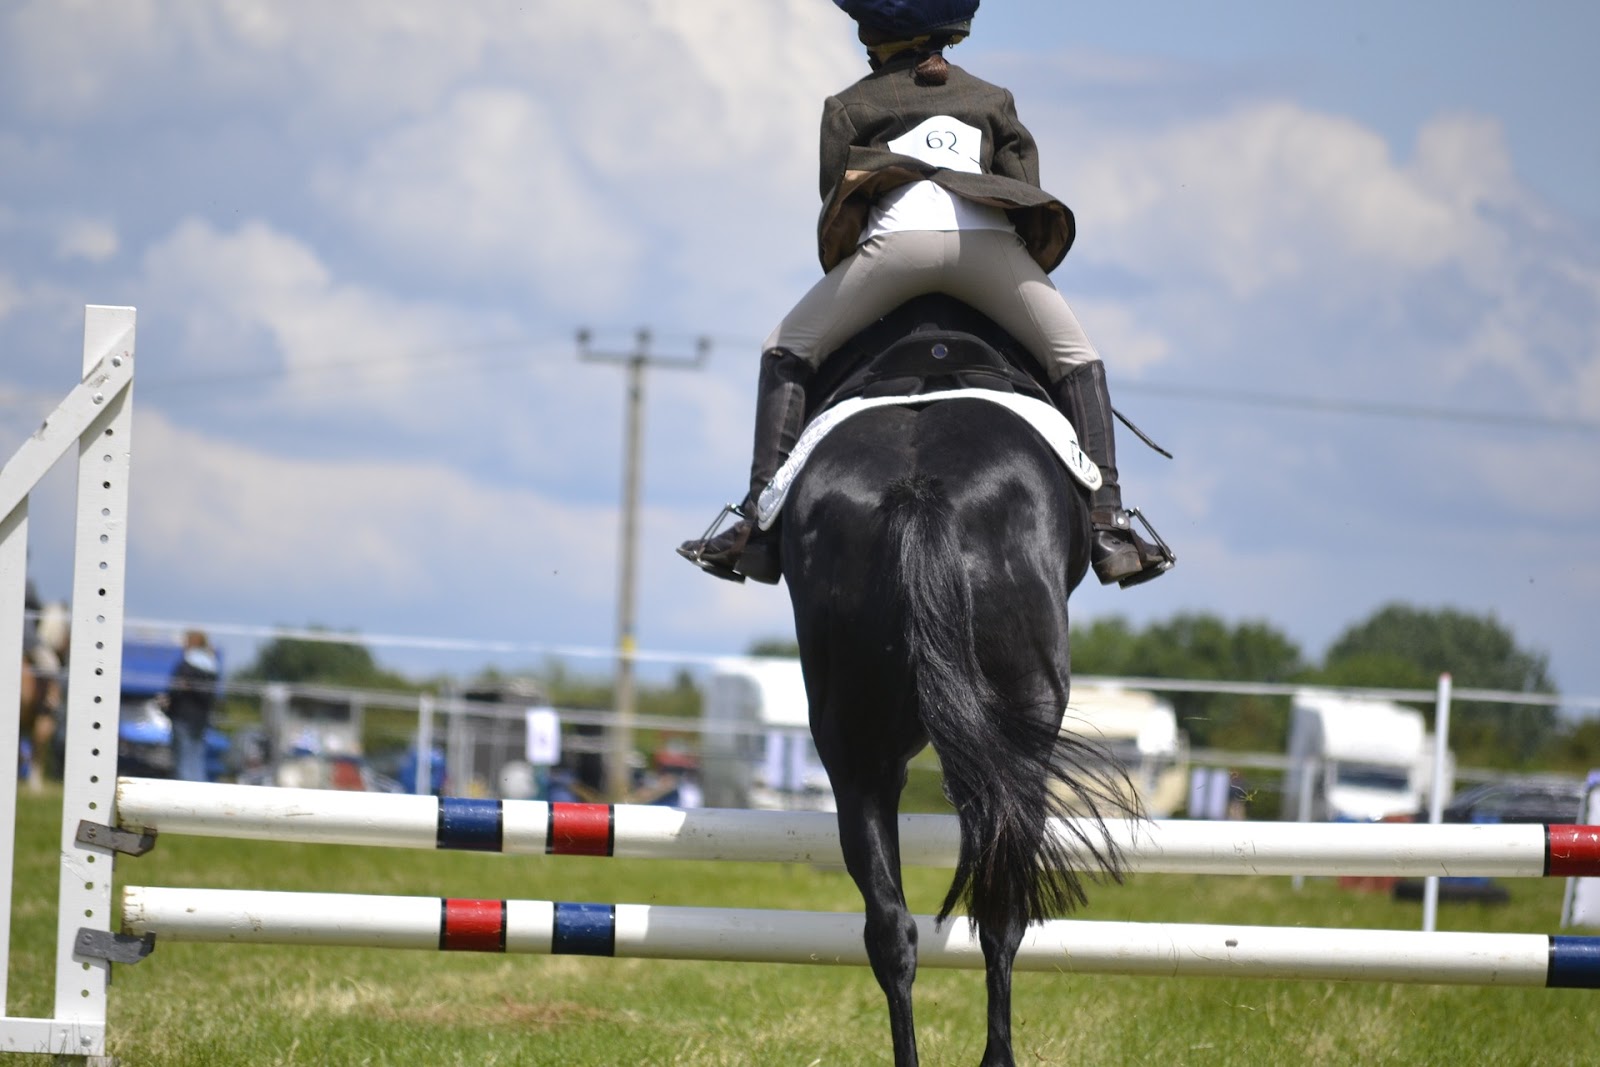 Small pony and rider jump a low vertical rail jump.